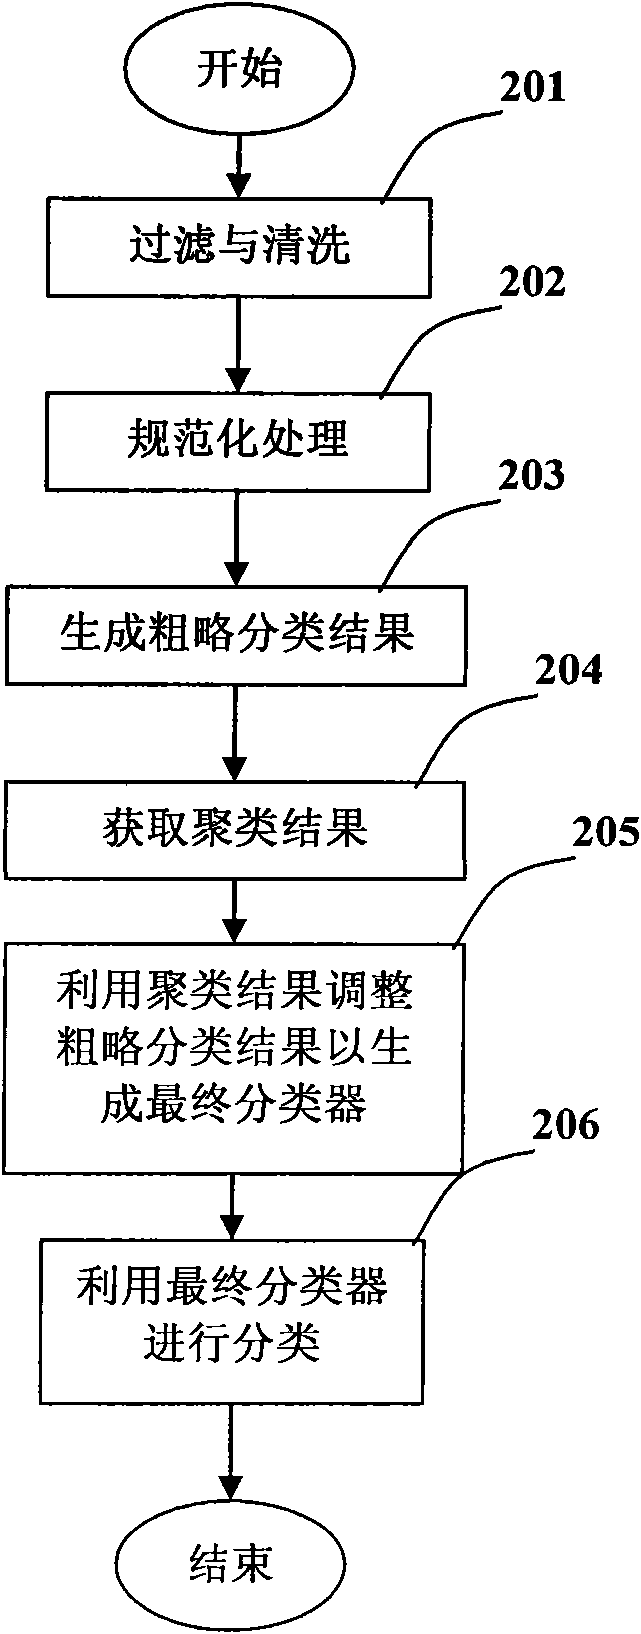 Method and system for digital object classification